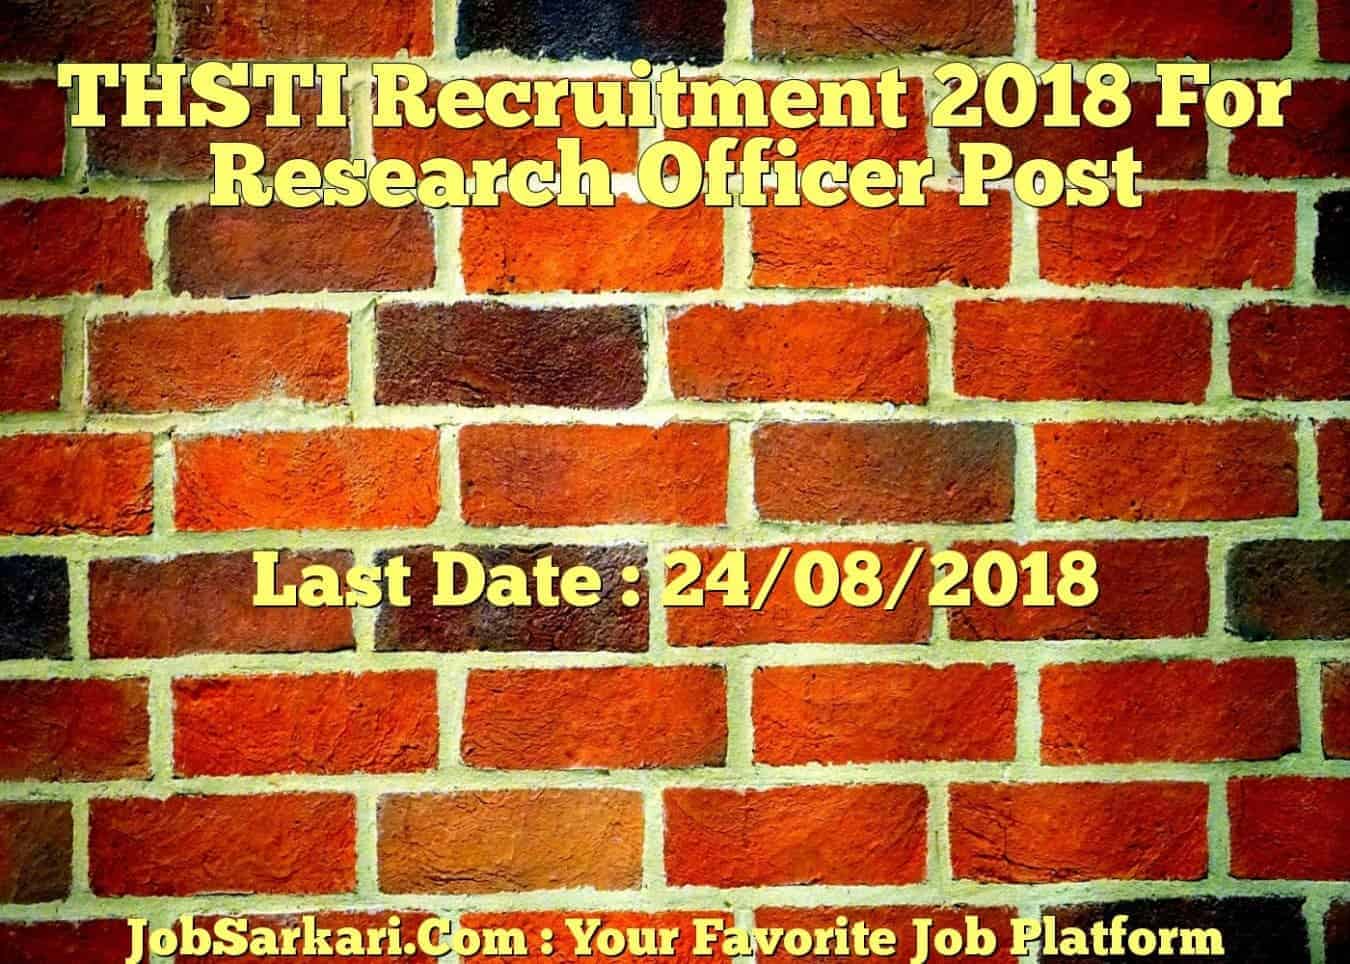 THSTI Recruitment 2018 For Research Officer Post